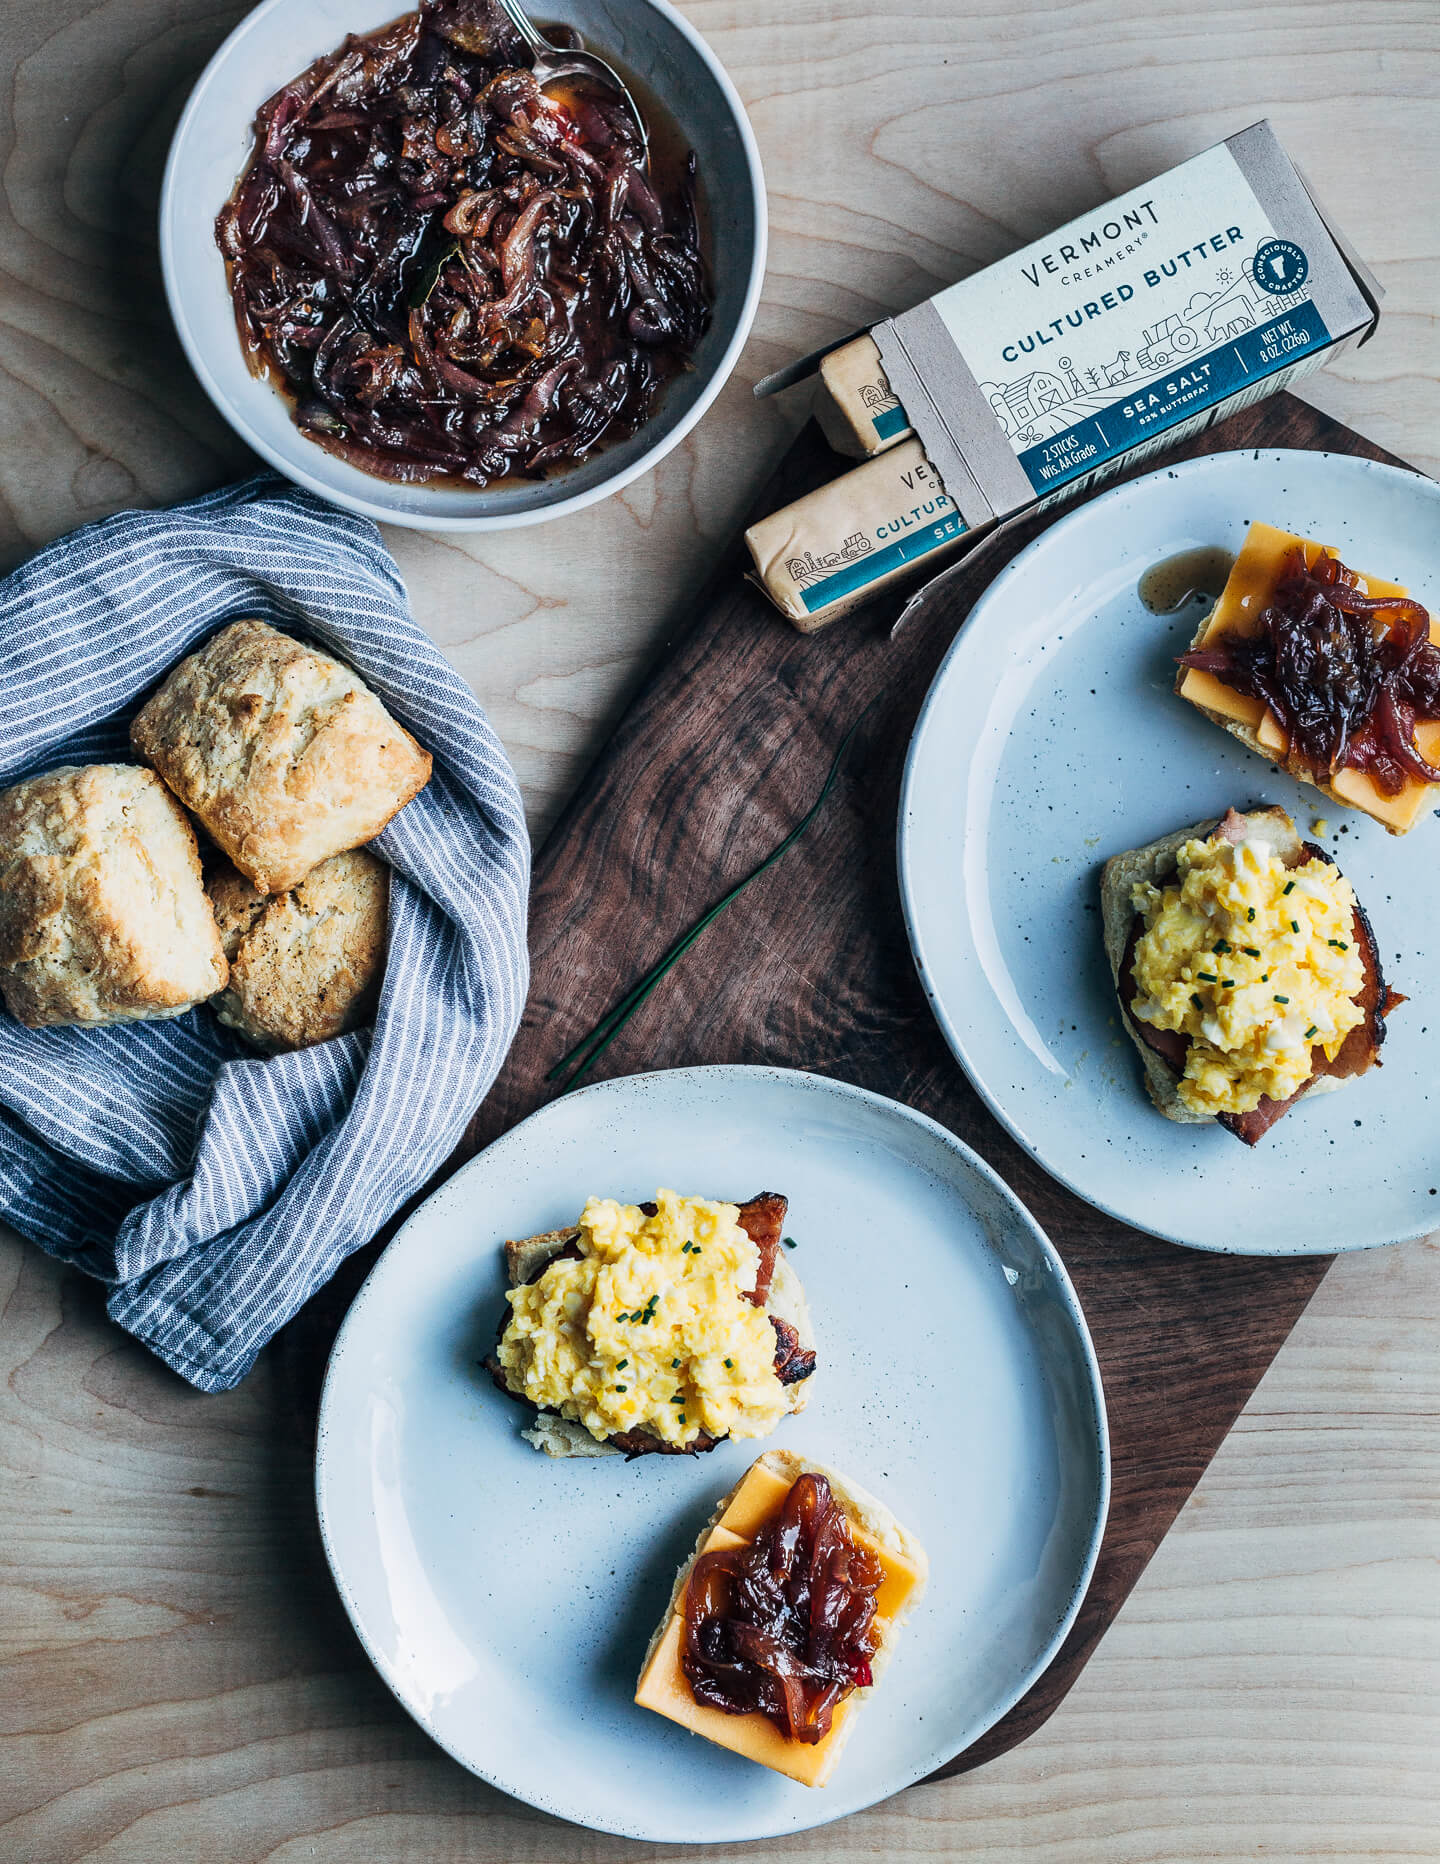 Perfect for a relaxed weekend or a holiday brunch, these layered biscuit sandwiches begin with airy homemade biscuits and are topped with thick-cut ham, slow-scrambled eggs, sharp cheddar, and a quick red onion jam.